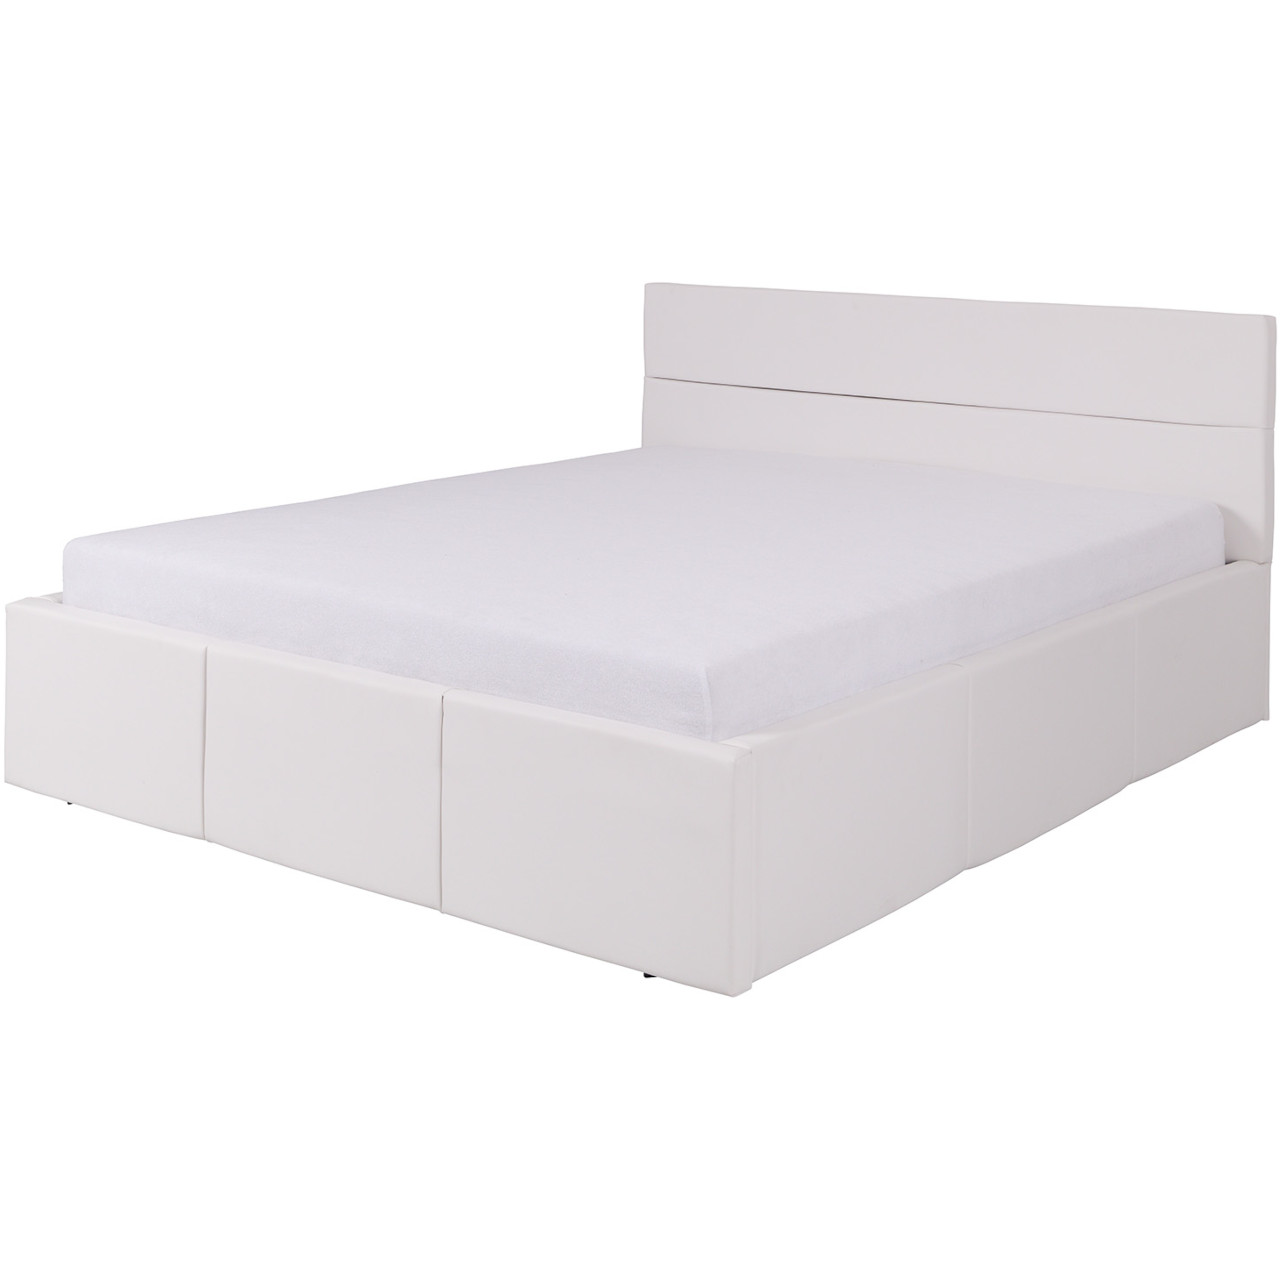 Bed 160x200 CALABRIA CL10 white